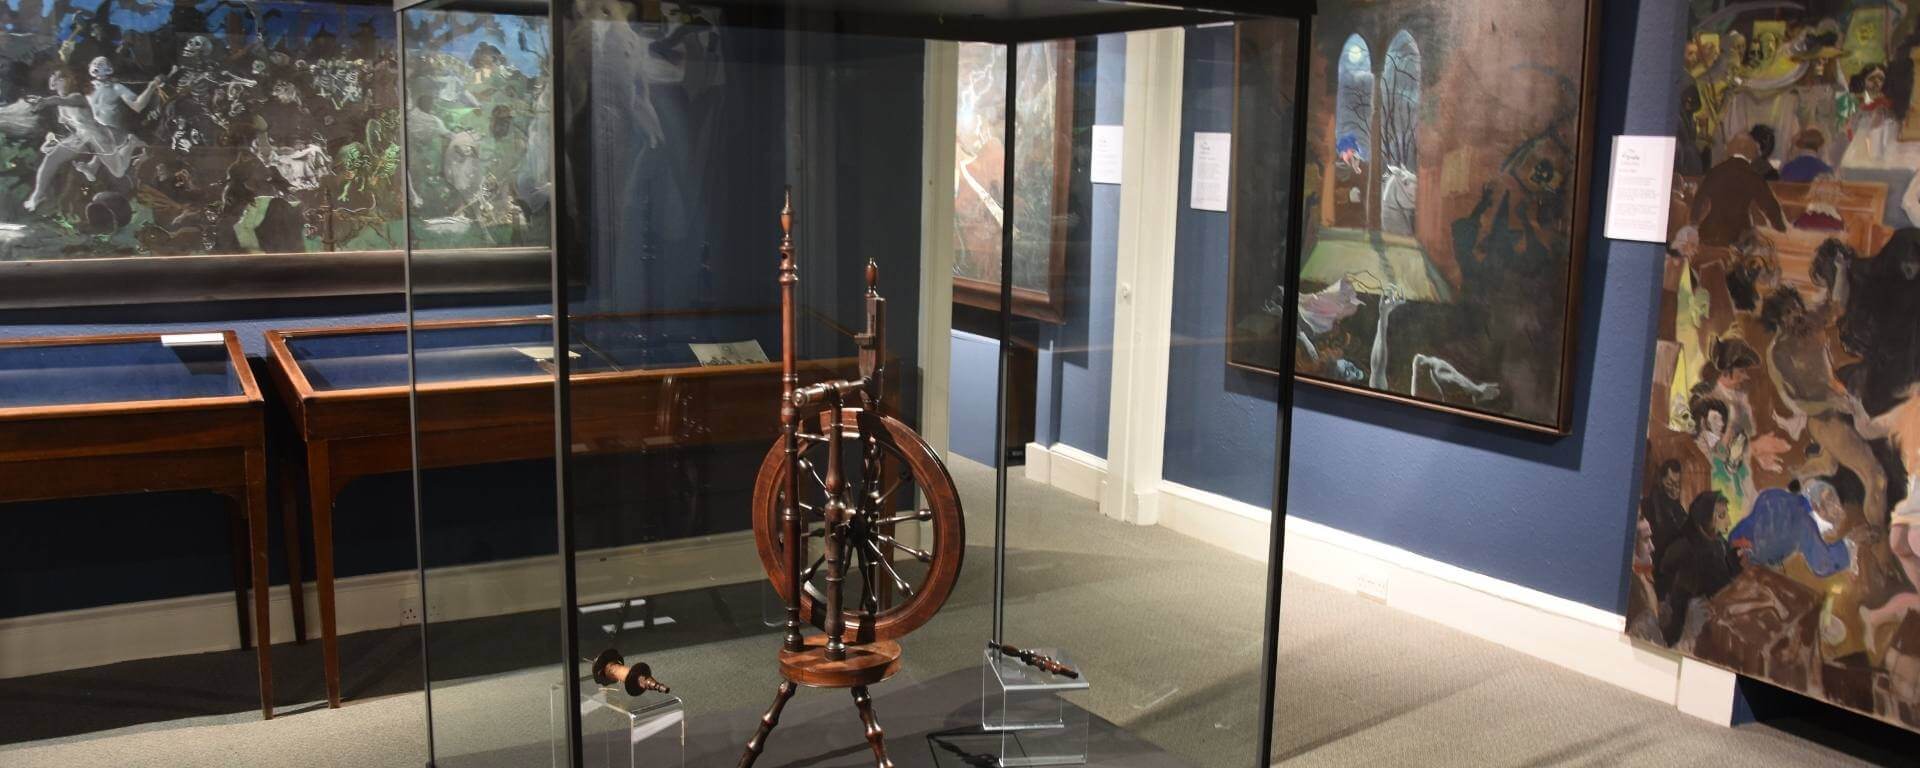 Spinning wheel in glass case surrounded by large artwork.